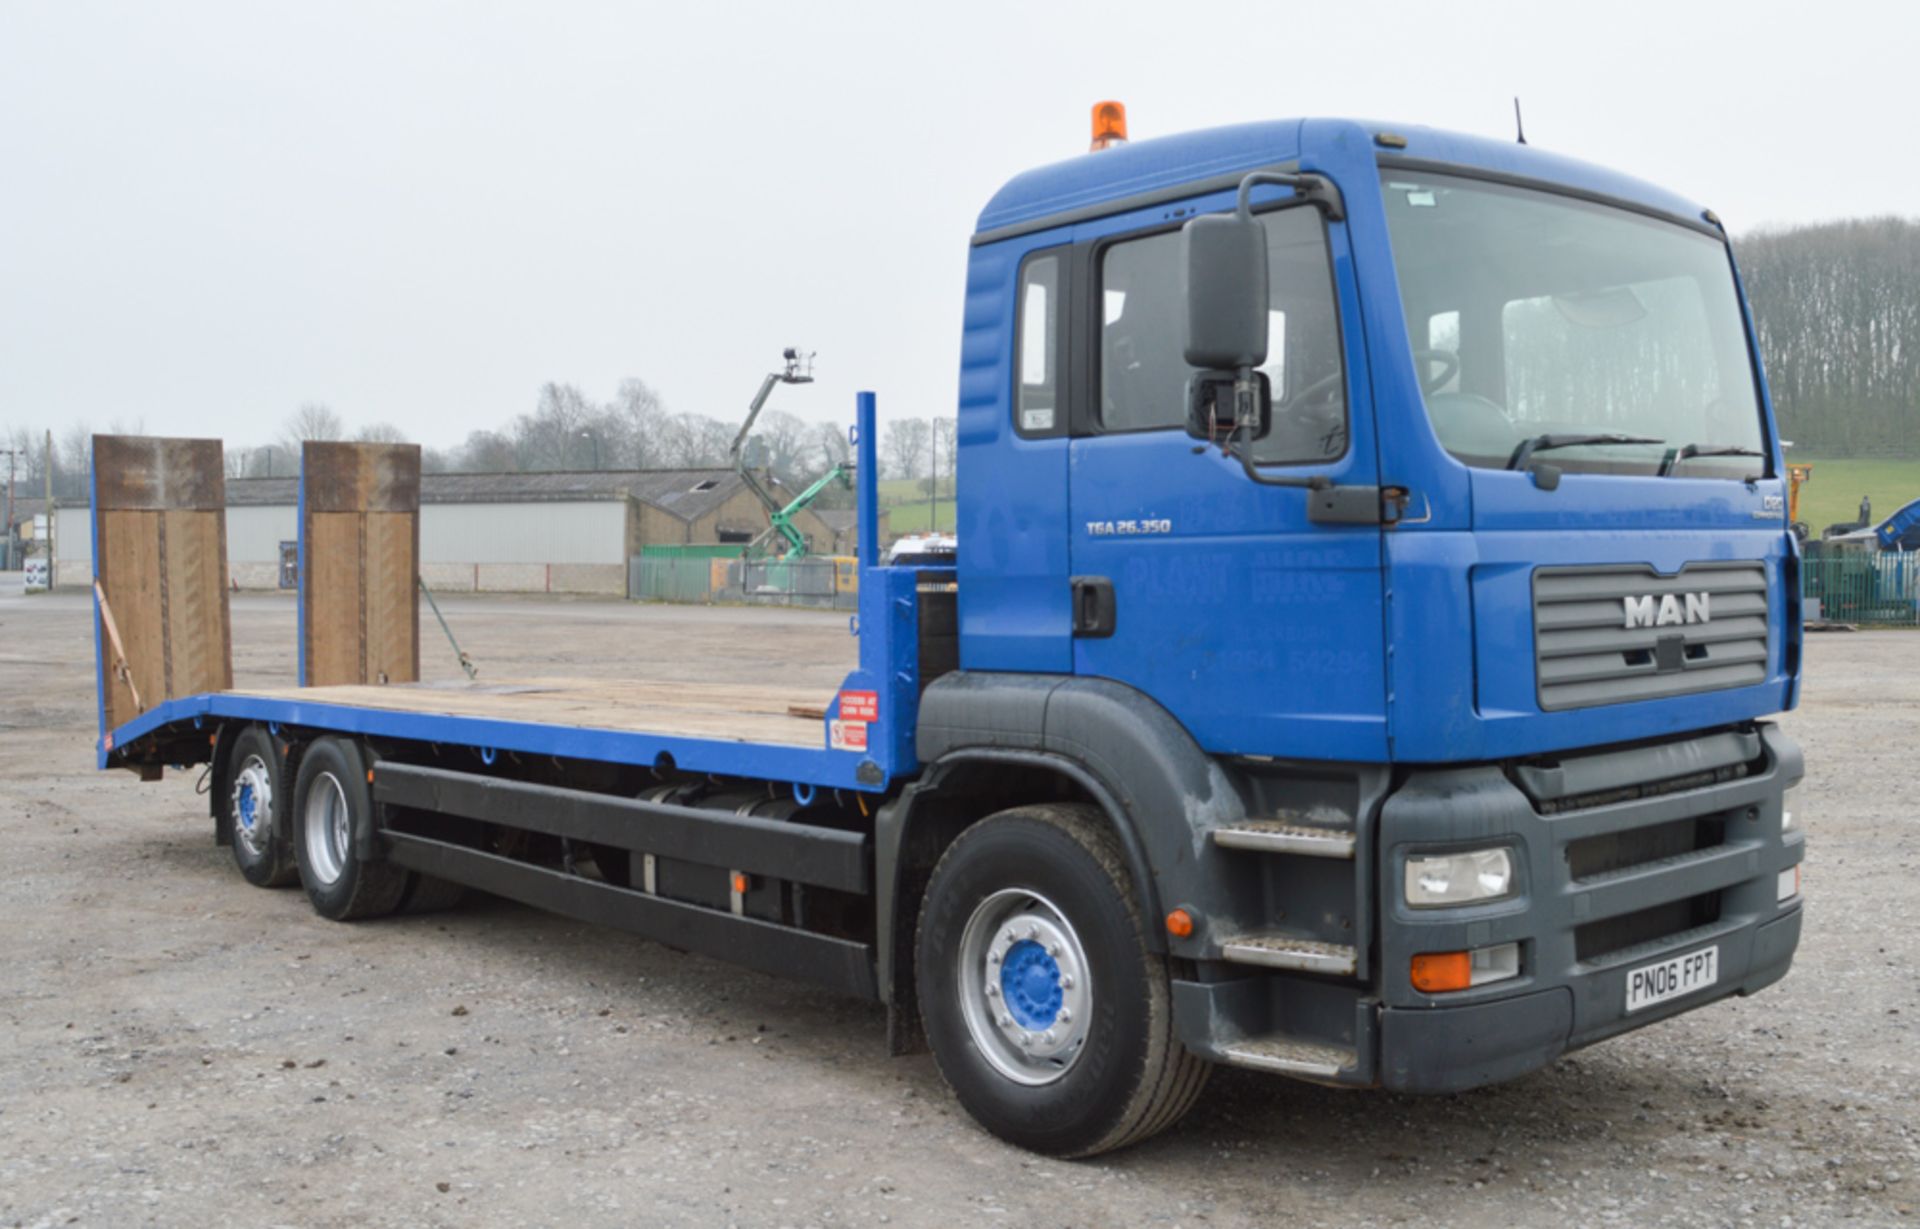 MAN TG-A 26.353 26 tonne beaver tail plant lorry Registration Number: PN06 FPT Date of Registration: - Image 4 of 6